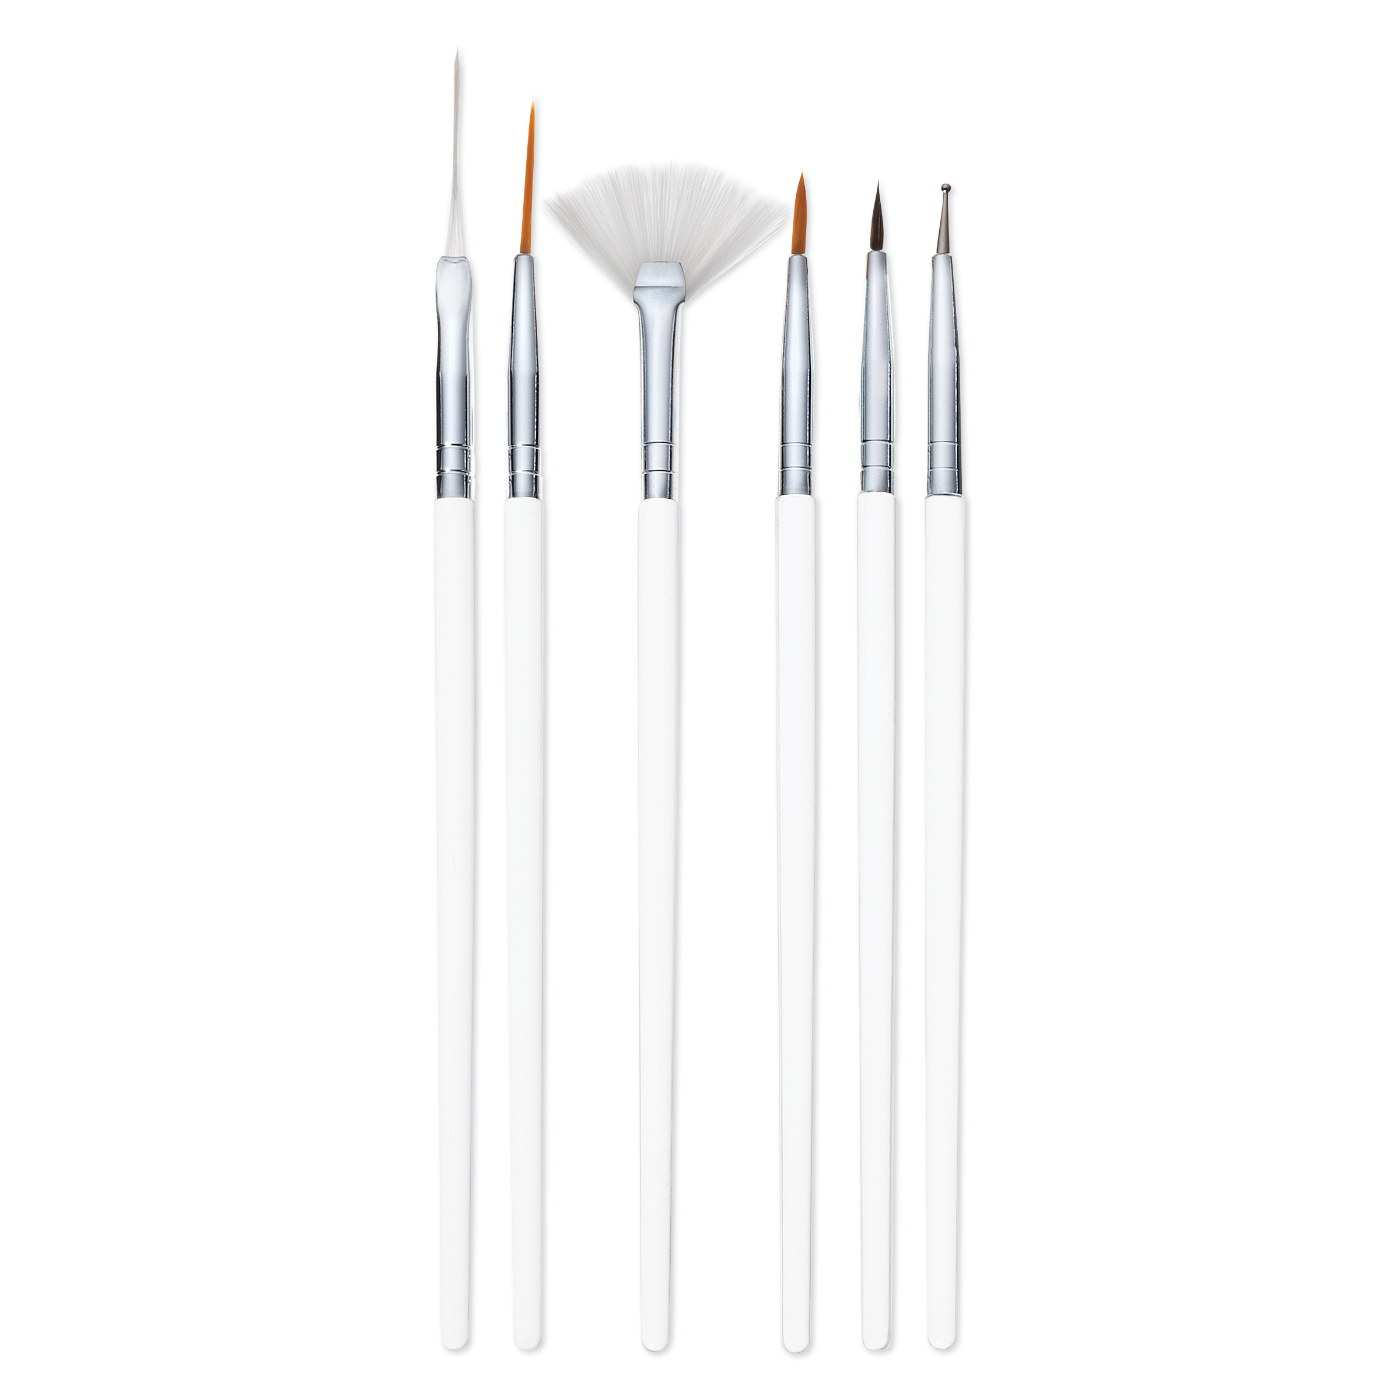 Nail Art Brush Set with Clear Handles - 6 pc.